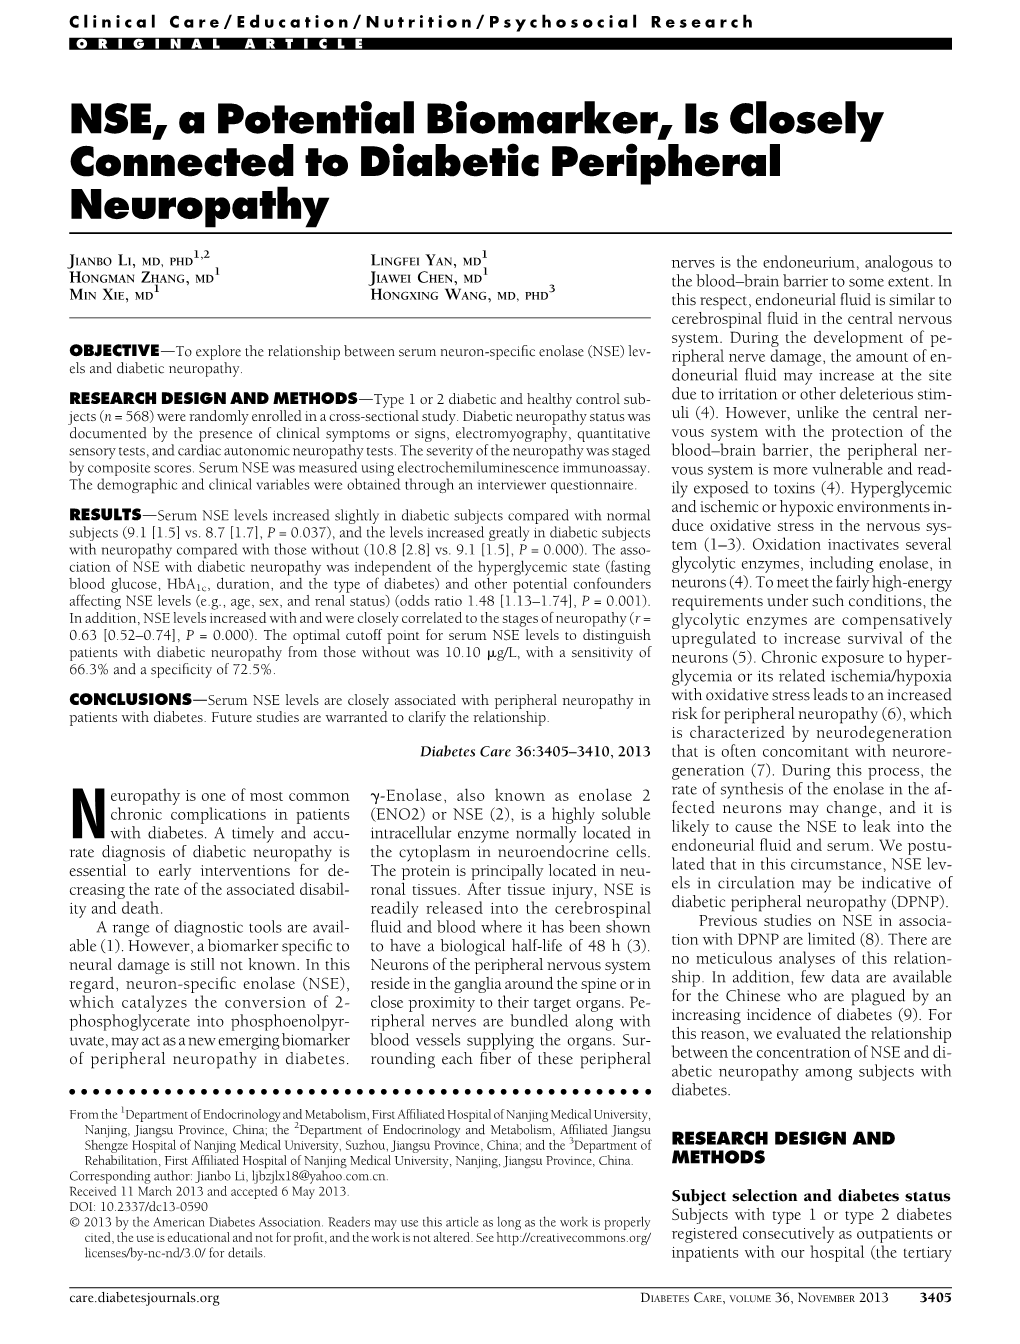 NSE, a Potential Biomarker, Is Closely Connected to Diabetic Peripheral Neuropathy